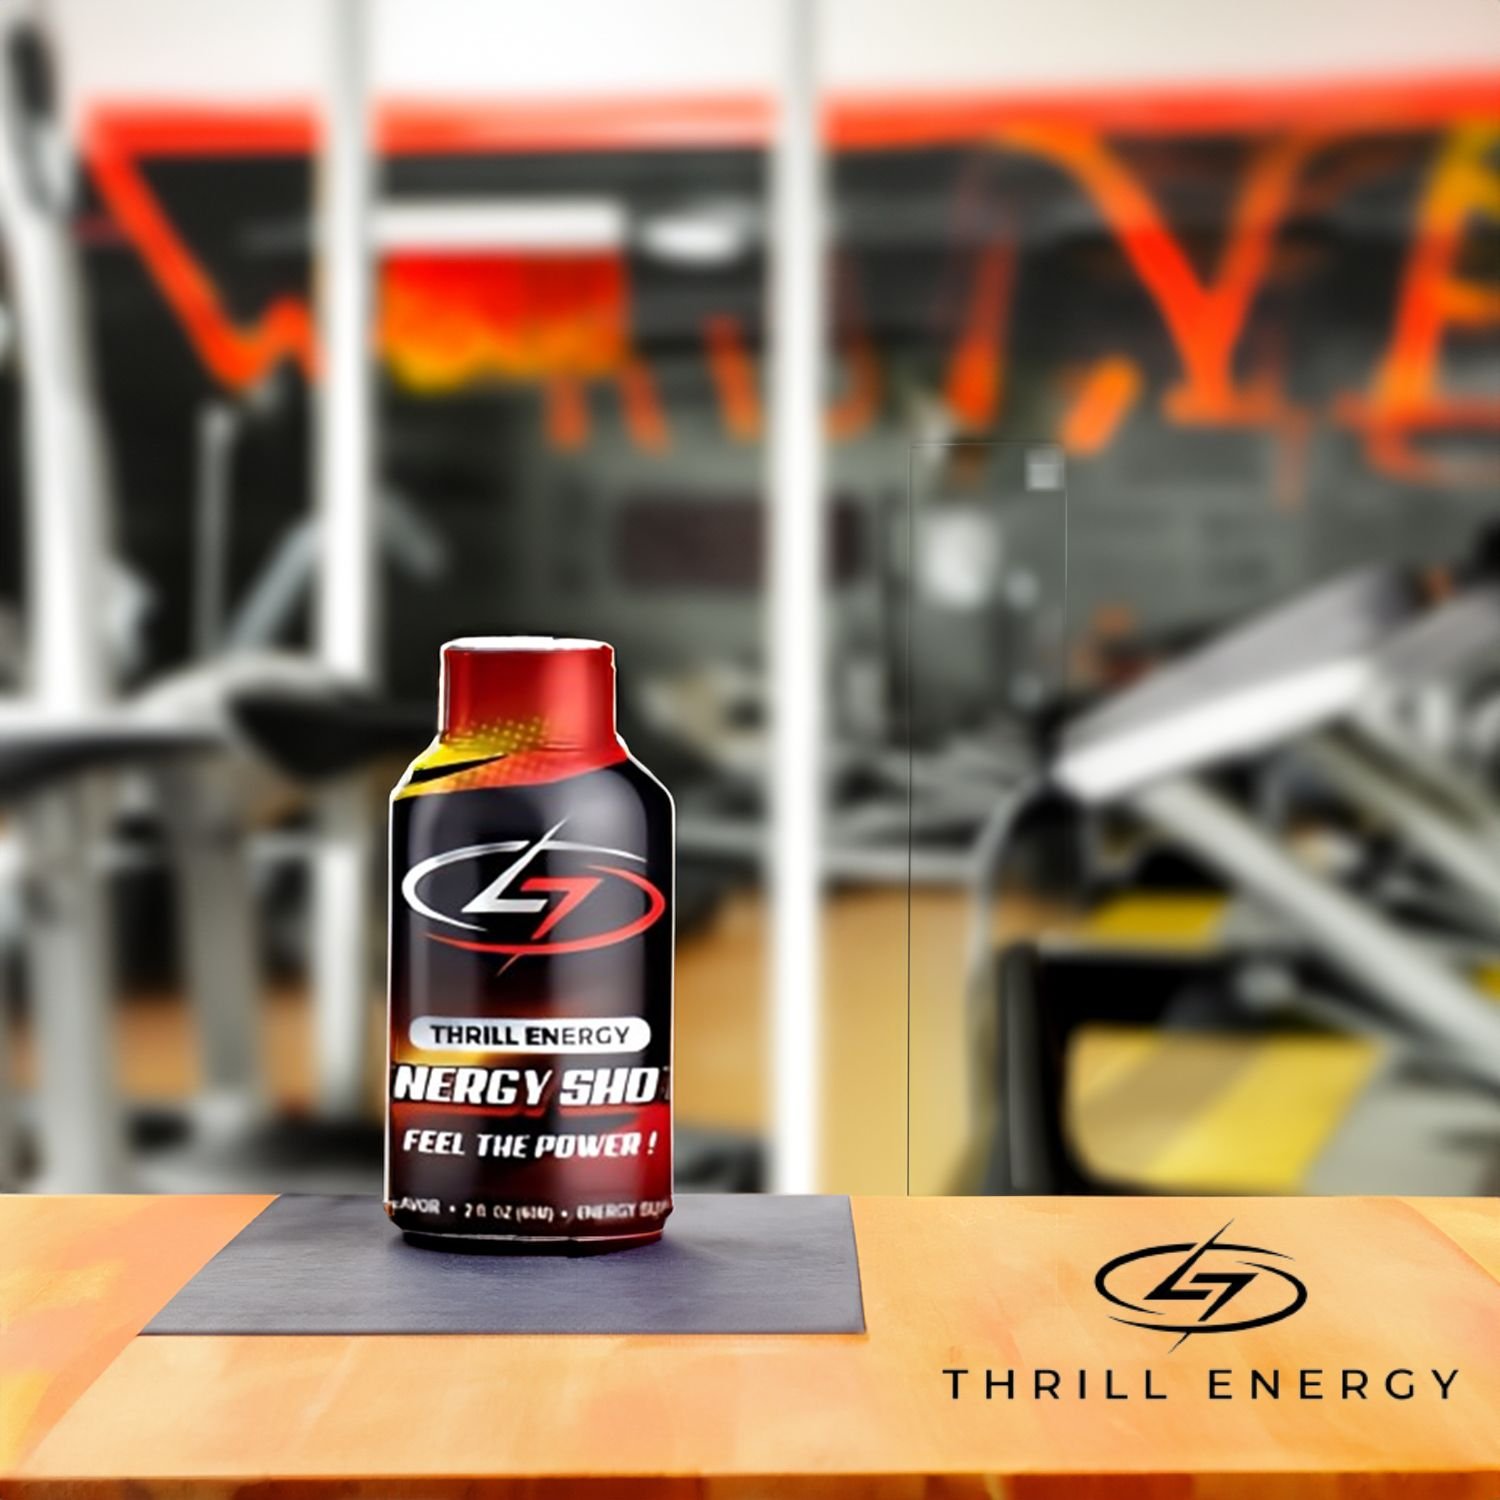 From sunrise workouts to late-night study sessions, you bring the energy and passion that inspire us every day. Share your moments and join the movement of achievers. #CommunityPower #ThrillEnergy #EnergyDrinks #Empowerment #RedBull #MonsterEnergy #C